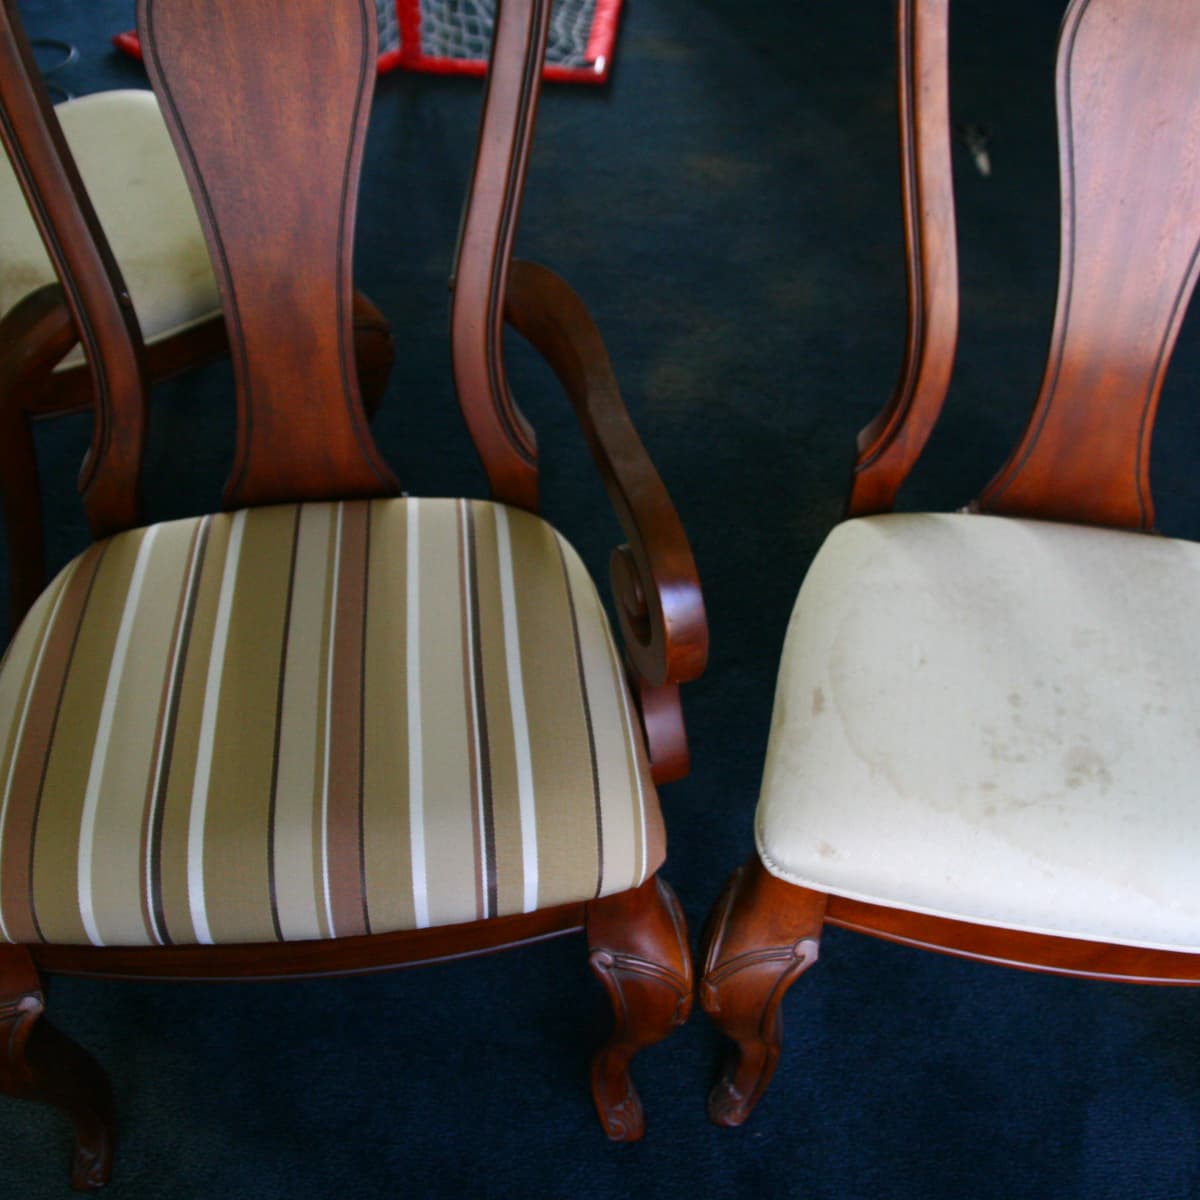 How To Reupholster A Dining Room Chair, How To Quickly Reupholster A Chair